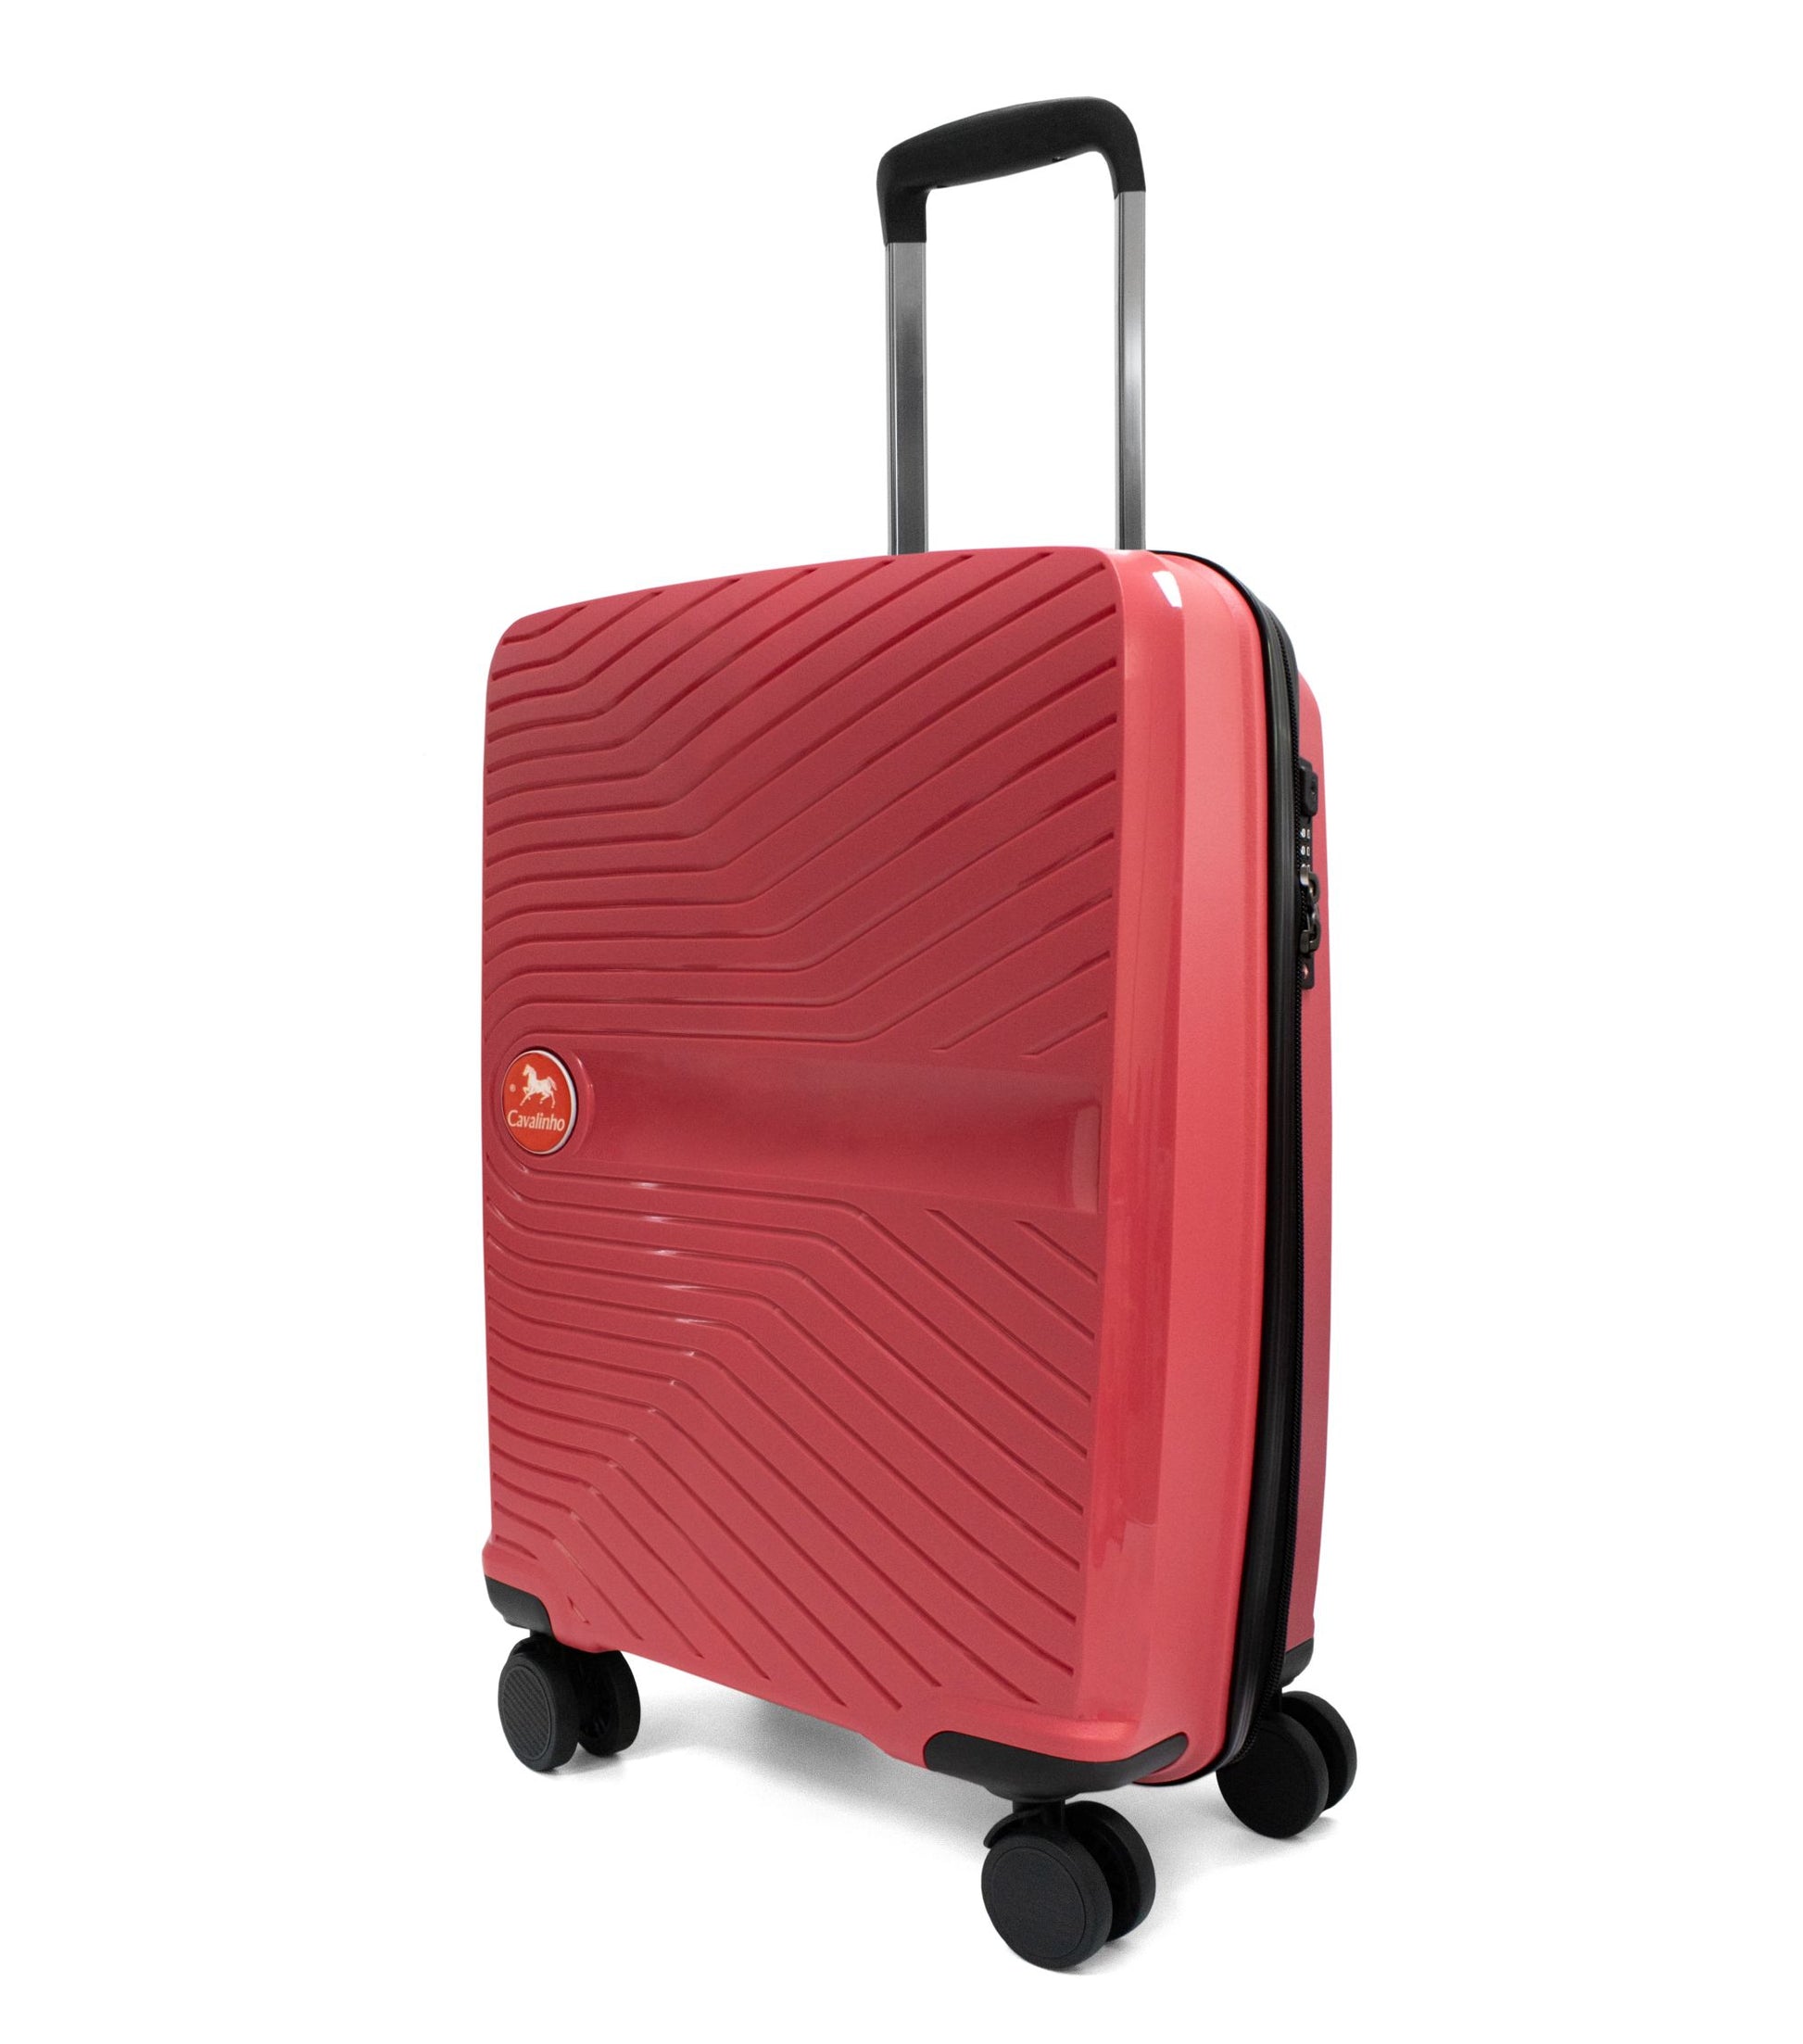 Cavalinho Colorful Carry-on Hardside Luggage (19") - 19 inch Coral - 68020004.27.19_2